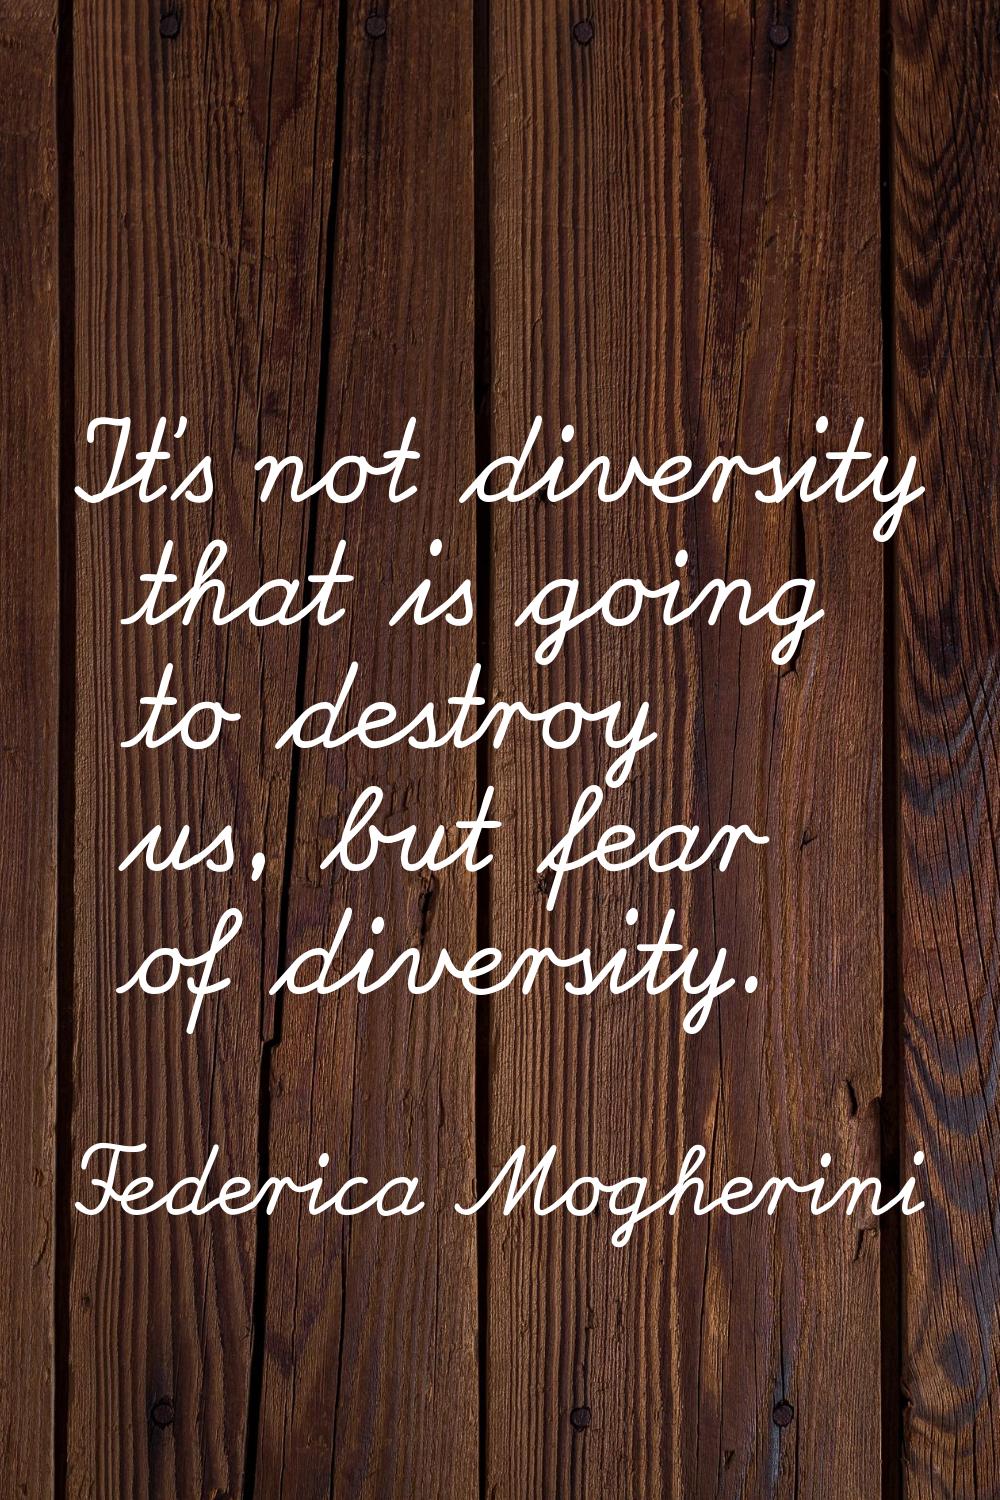 It's not diversity that is going to destroy us, but fear of diversity.